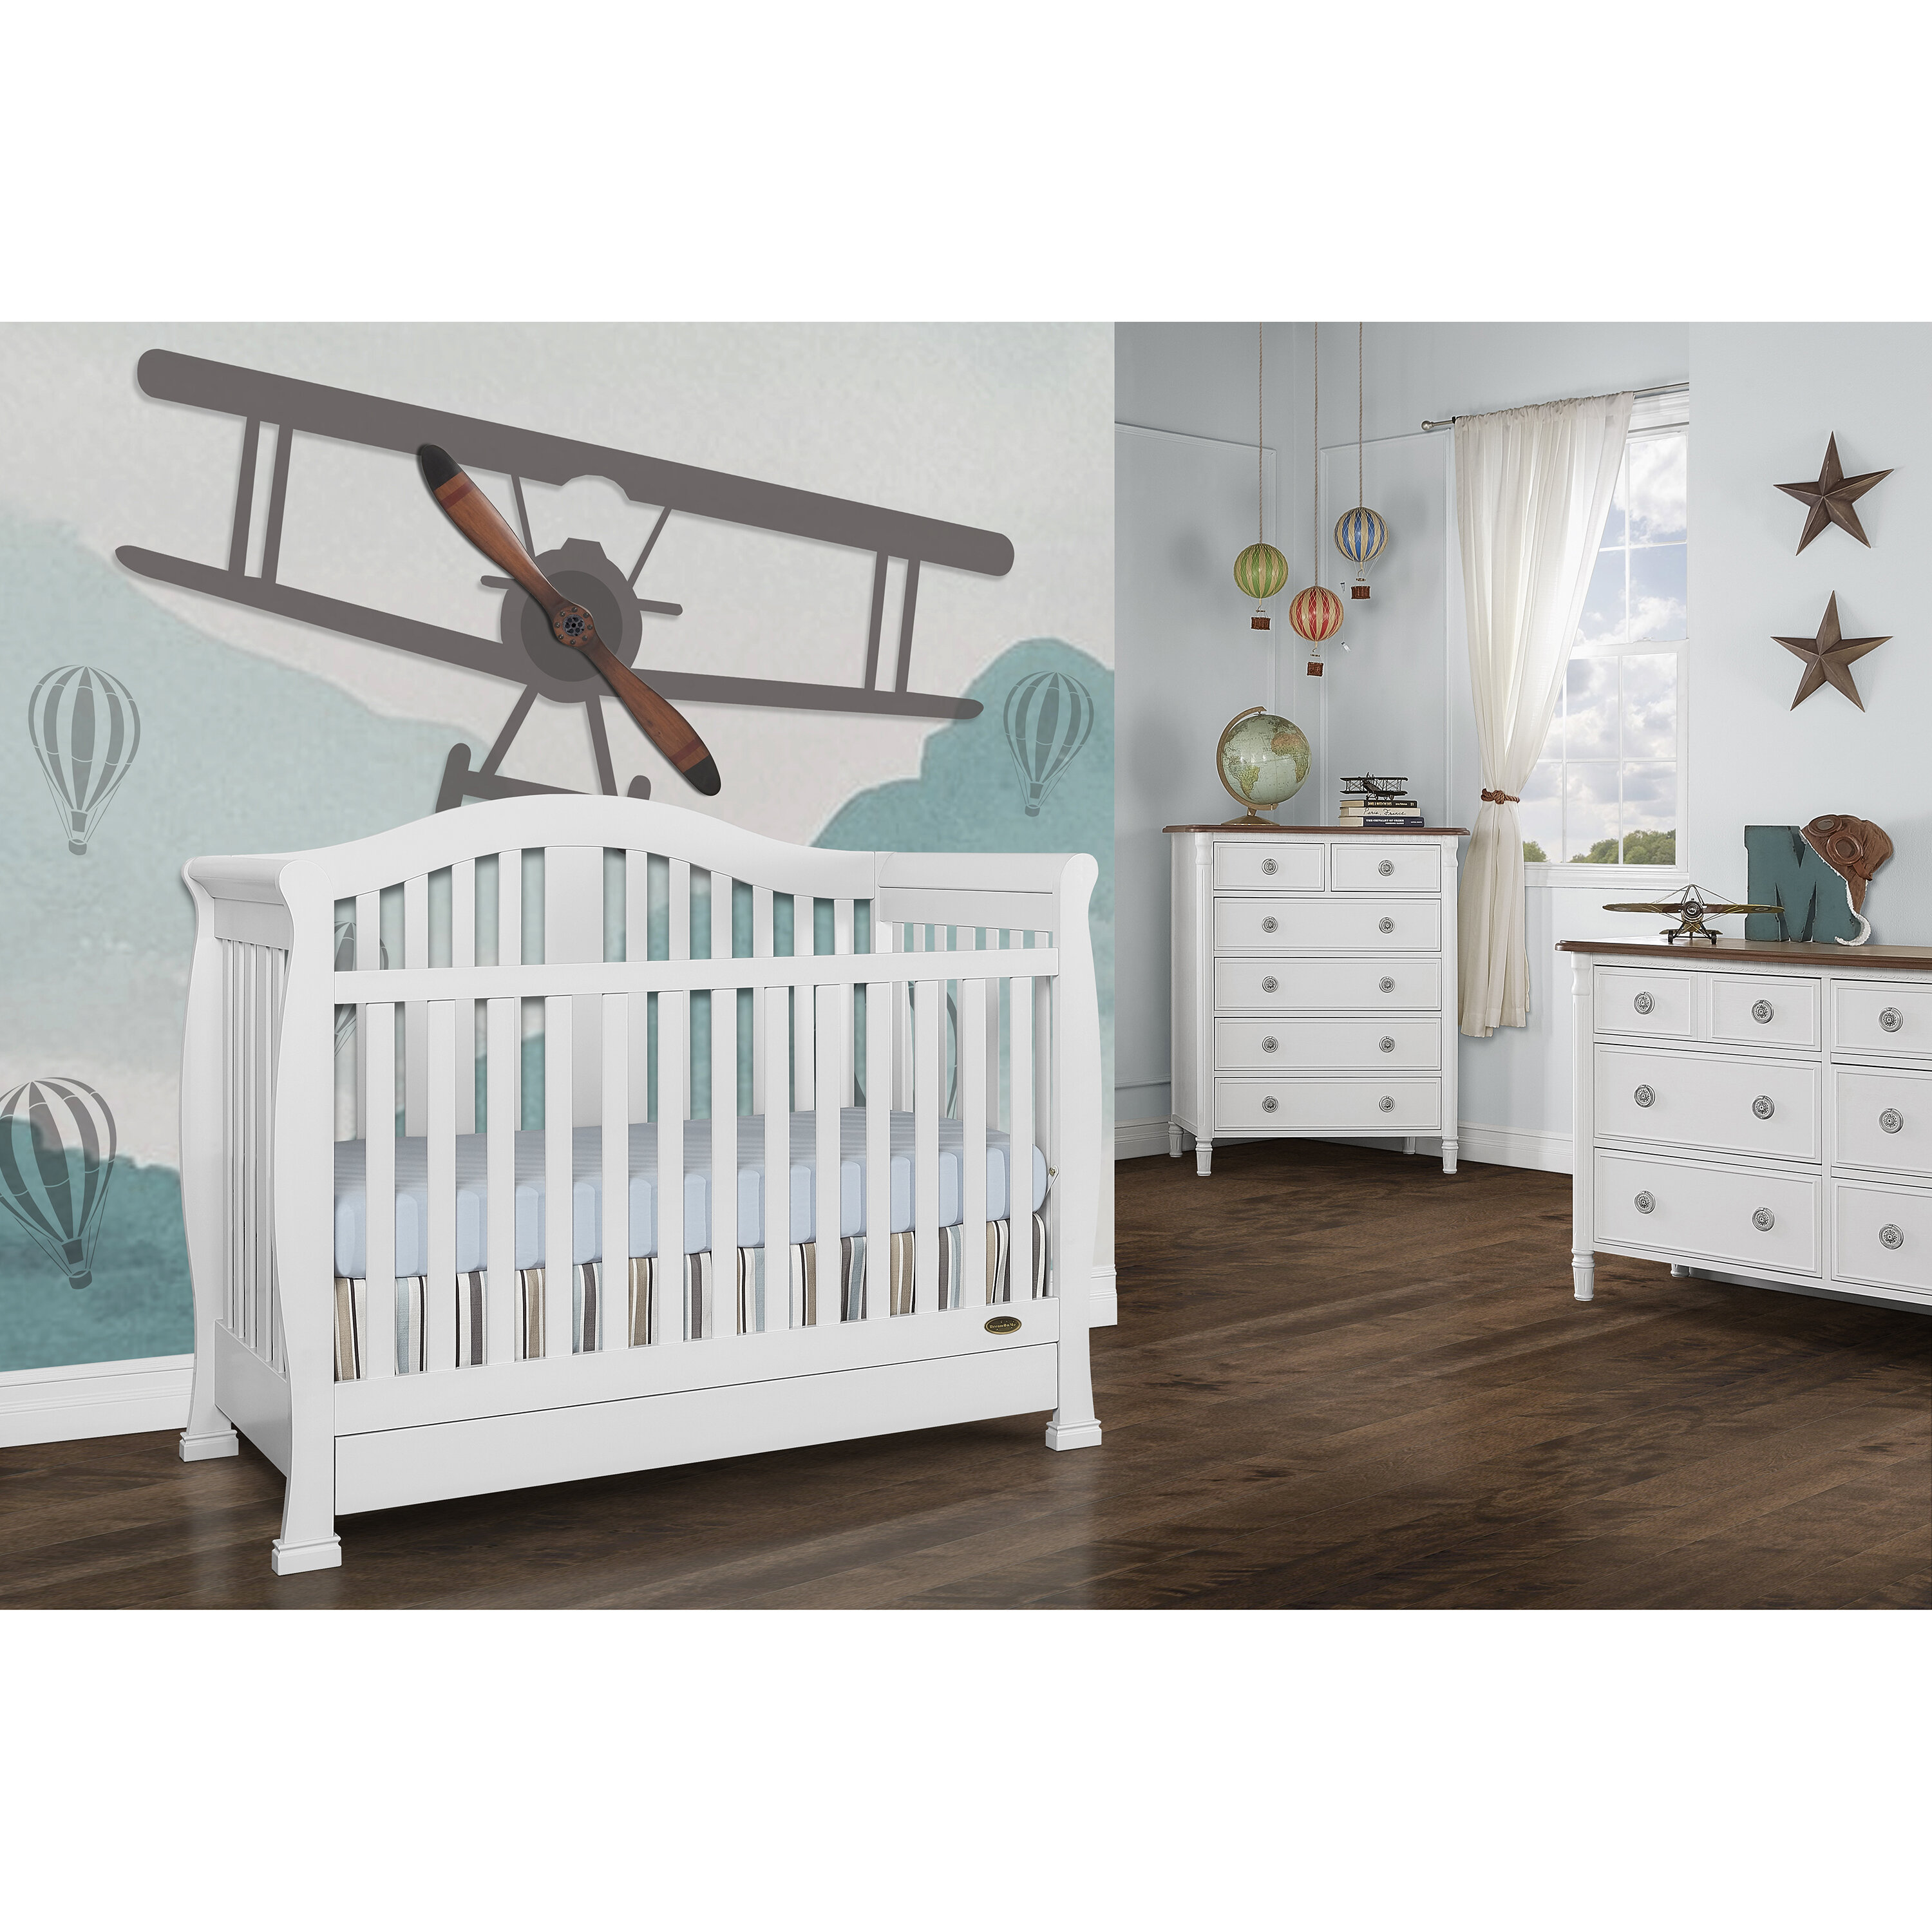 cheap crib for baby